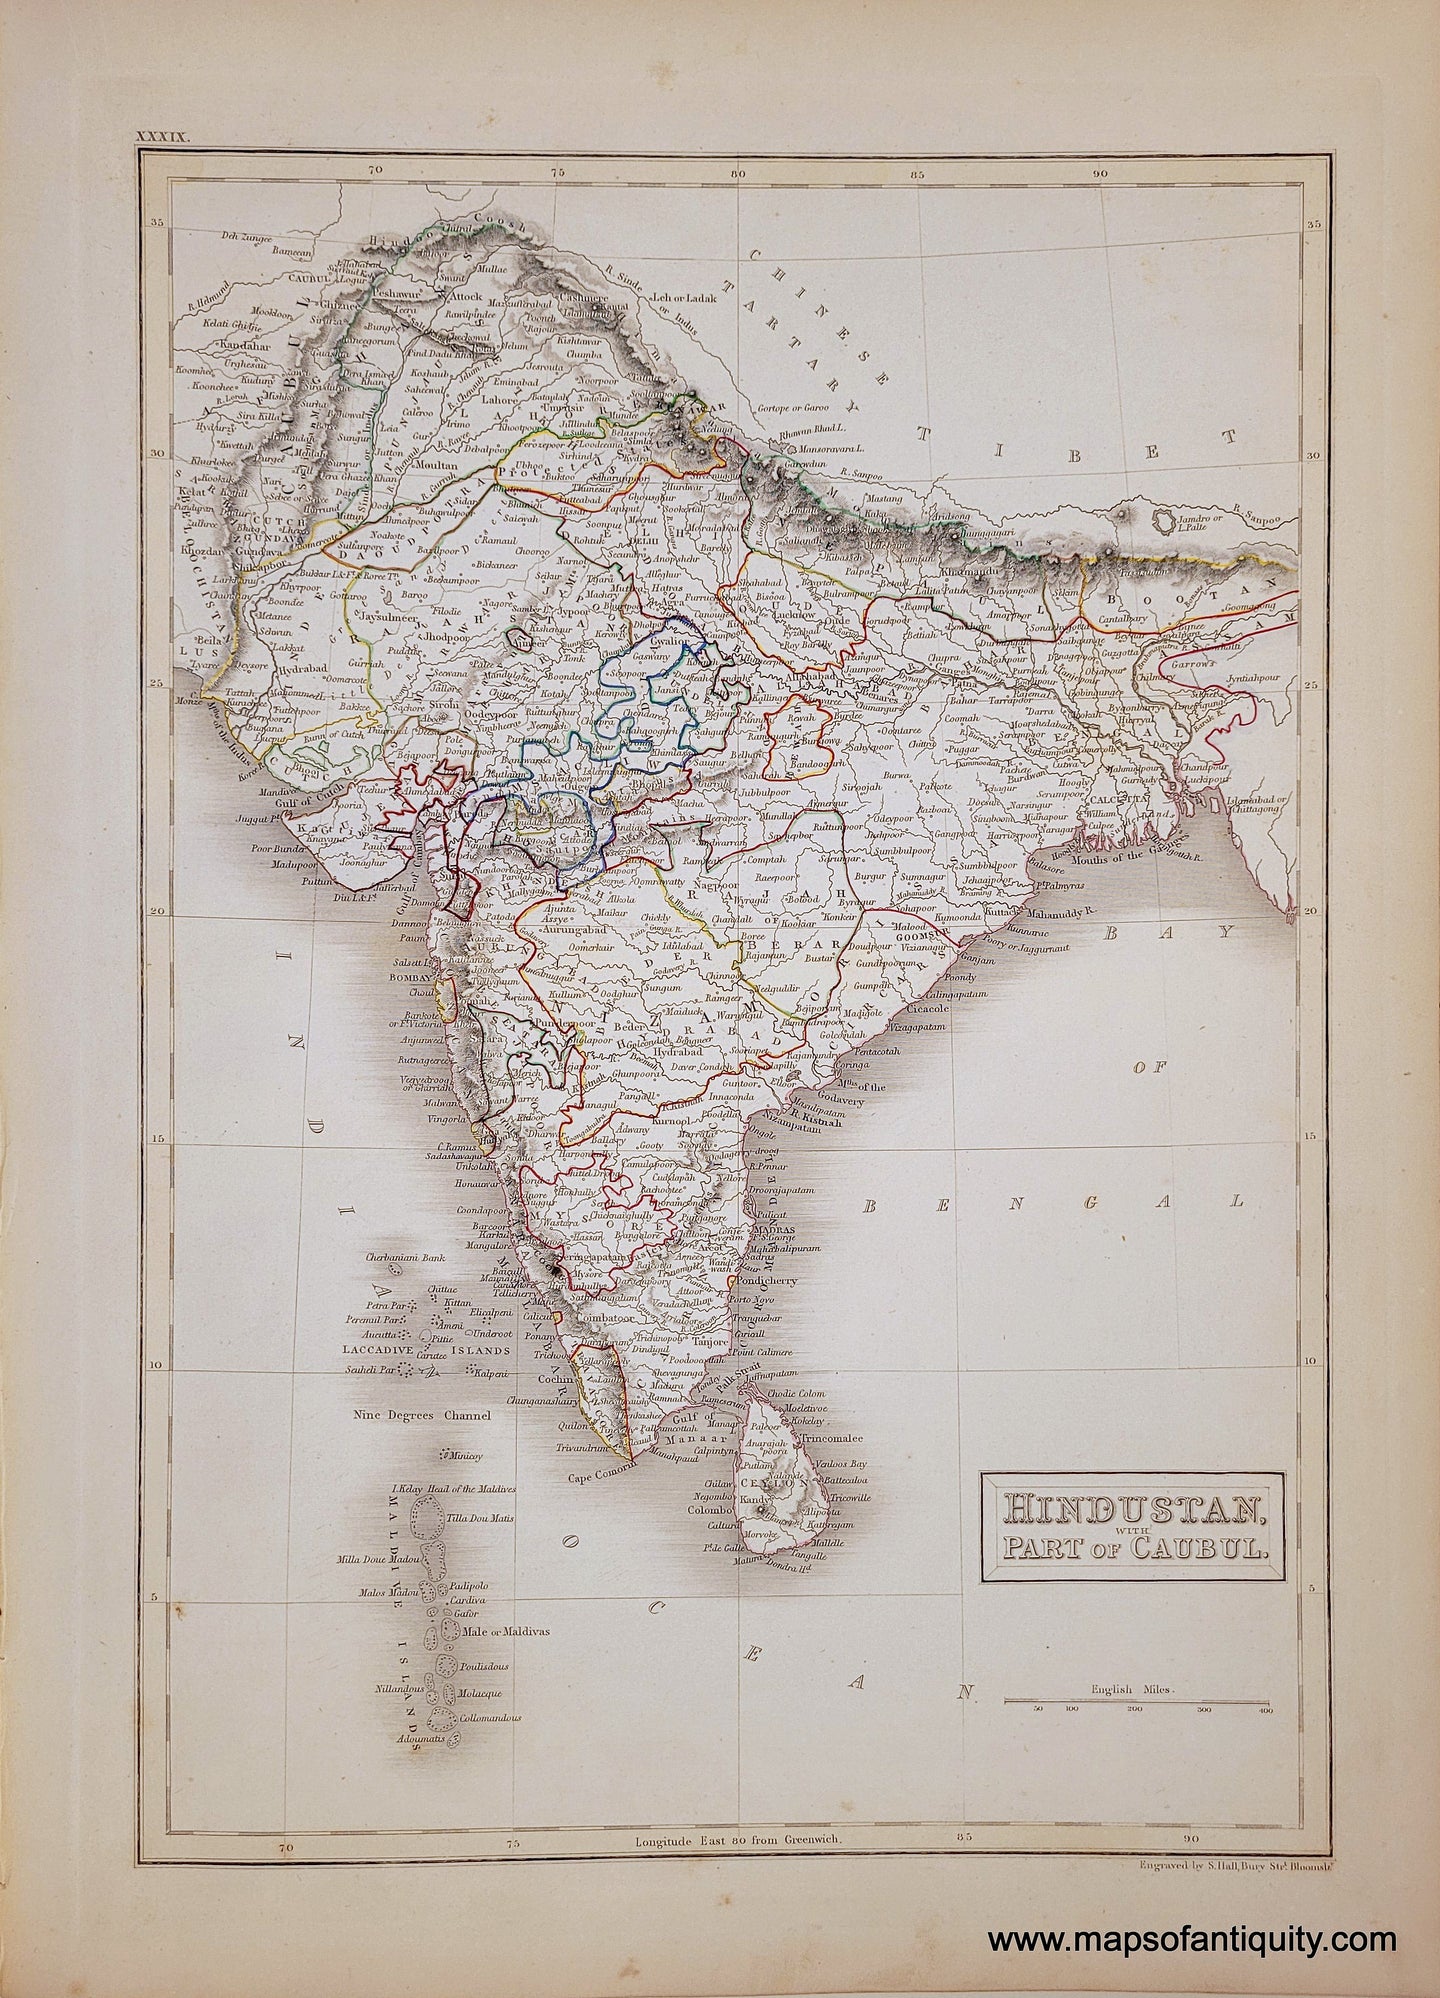 Genuine-Antique-Map-Hindustan-with-part-of-Caubul-1841-Black-Maps-Of-Antiquity